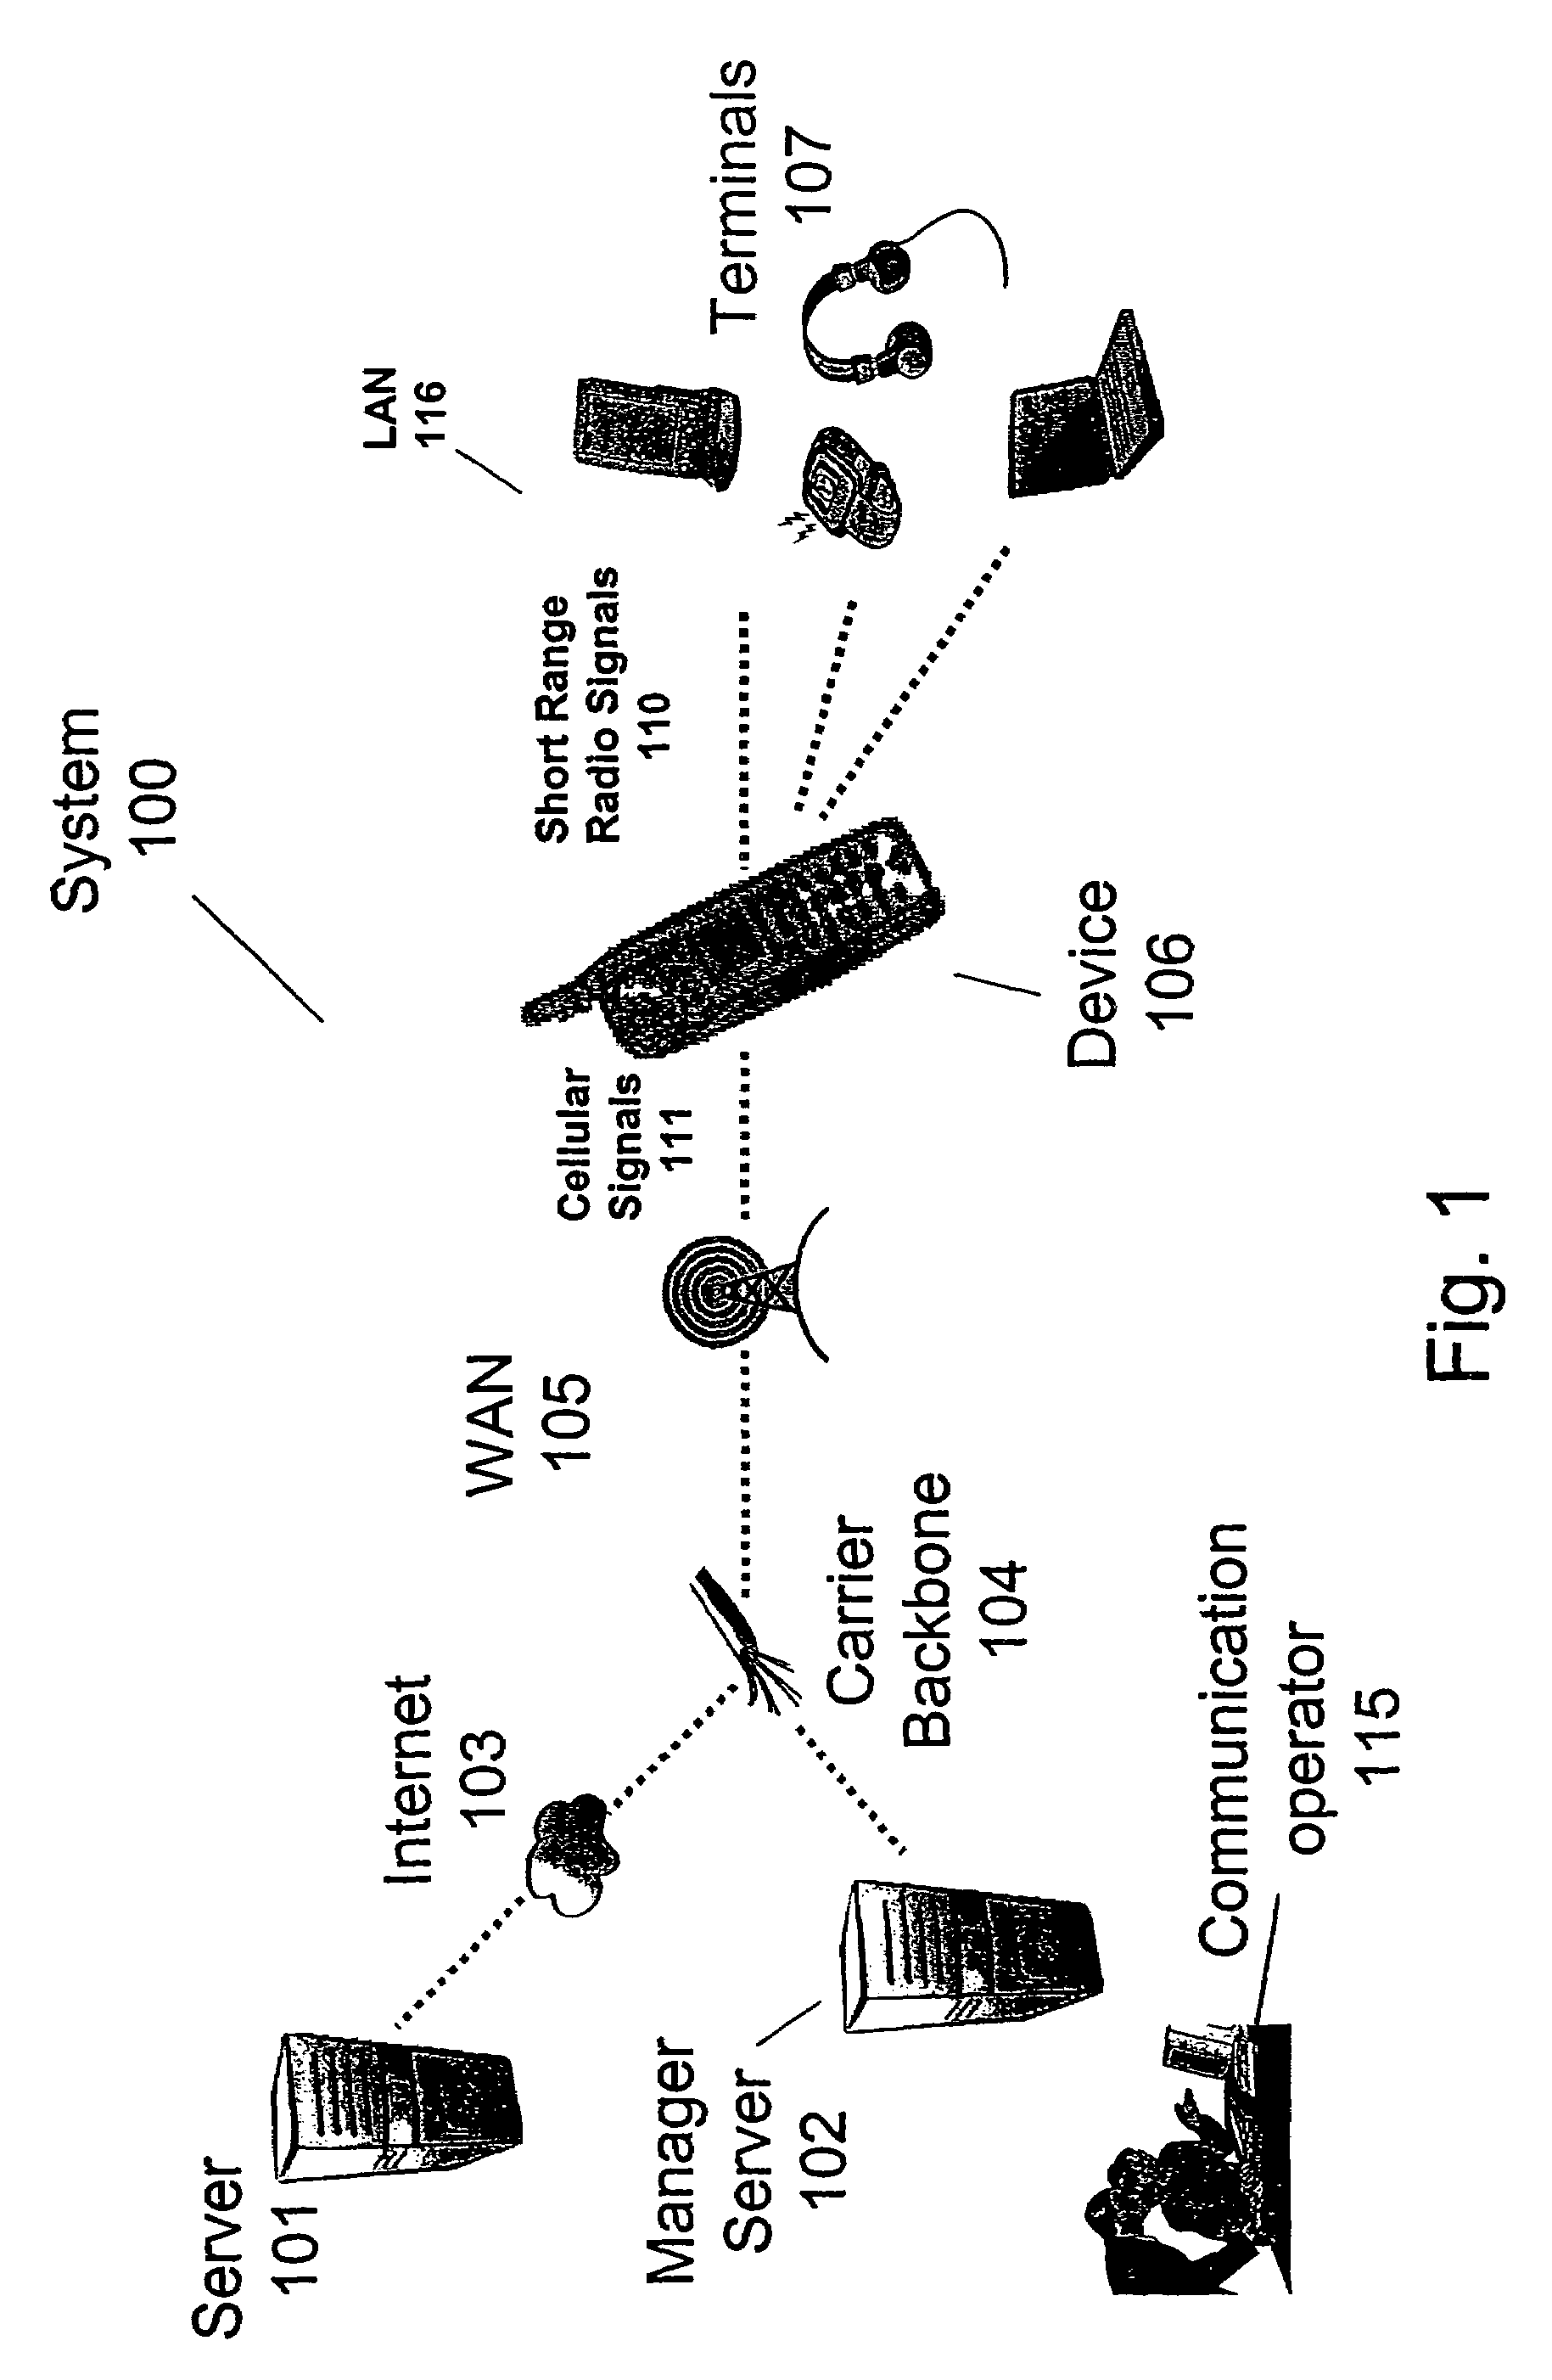 System, device and computer readable medium for providing networking services on a mobile device